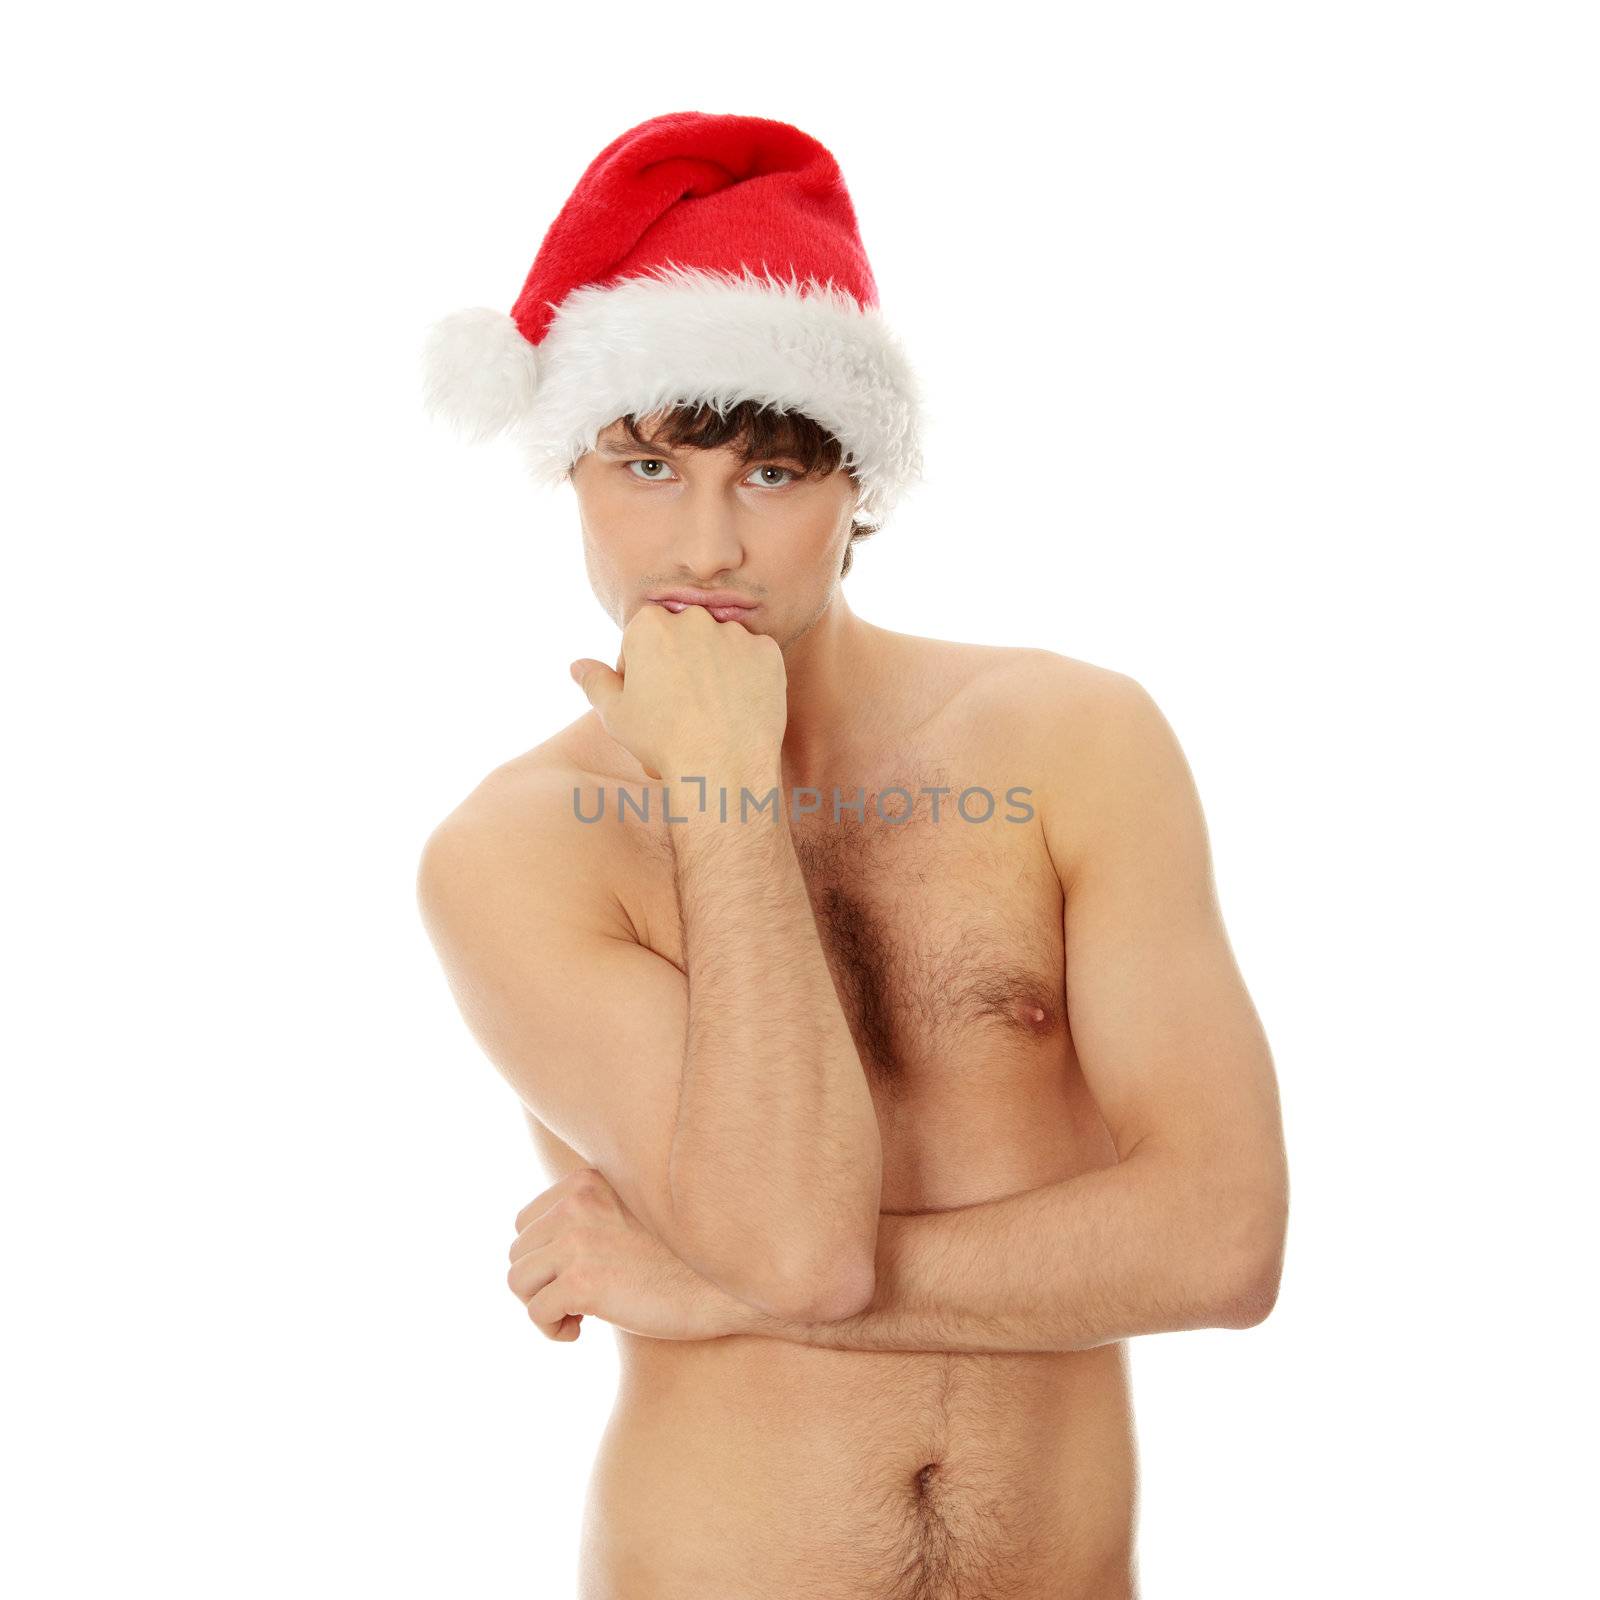 Young handsome man with Santa's cap standing naked. Isolated on white in studio.